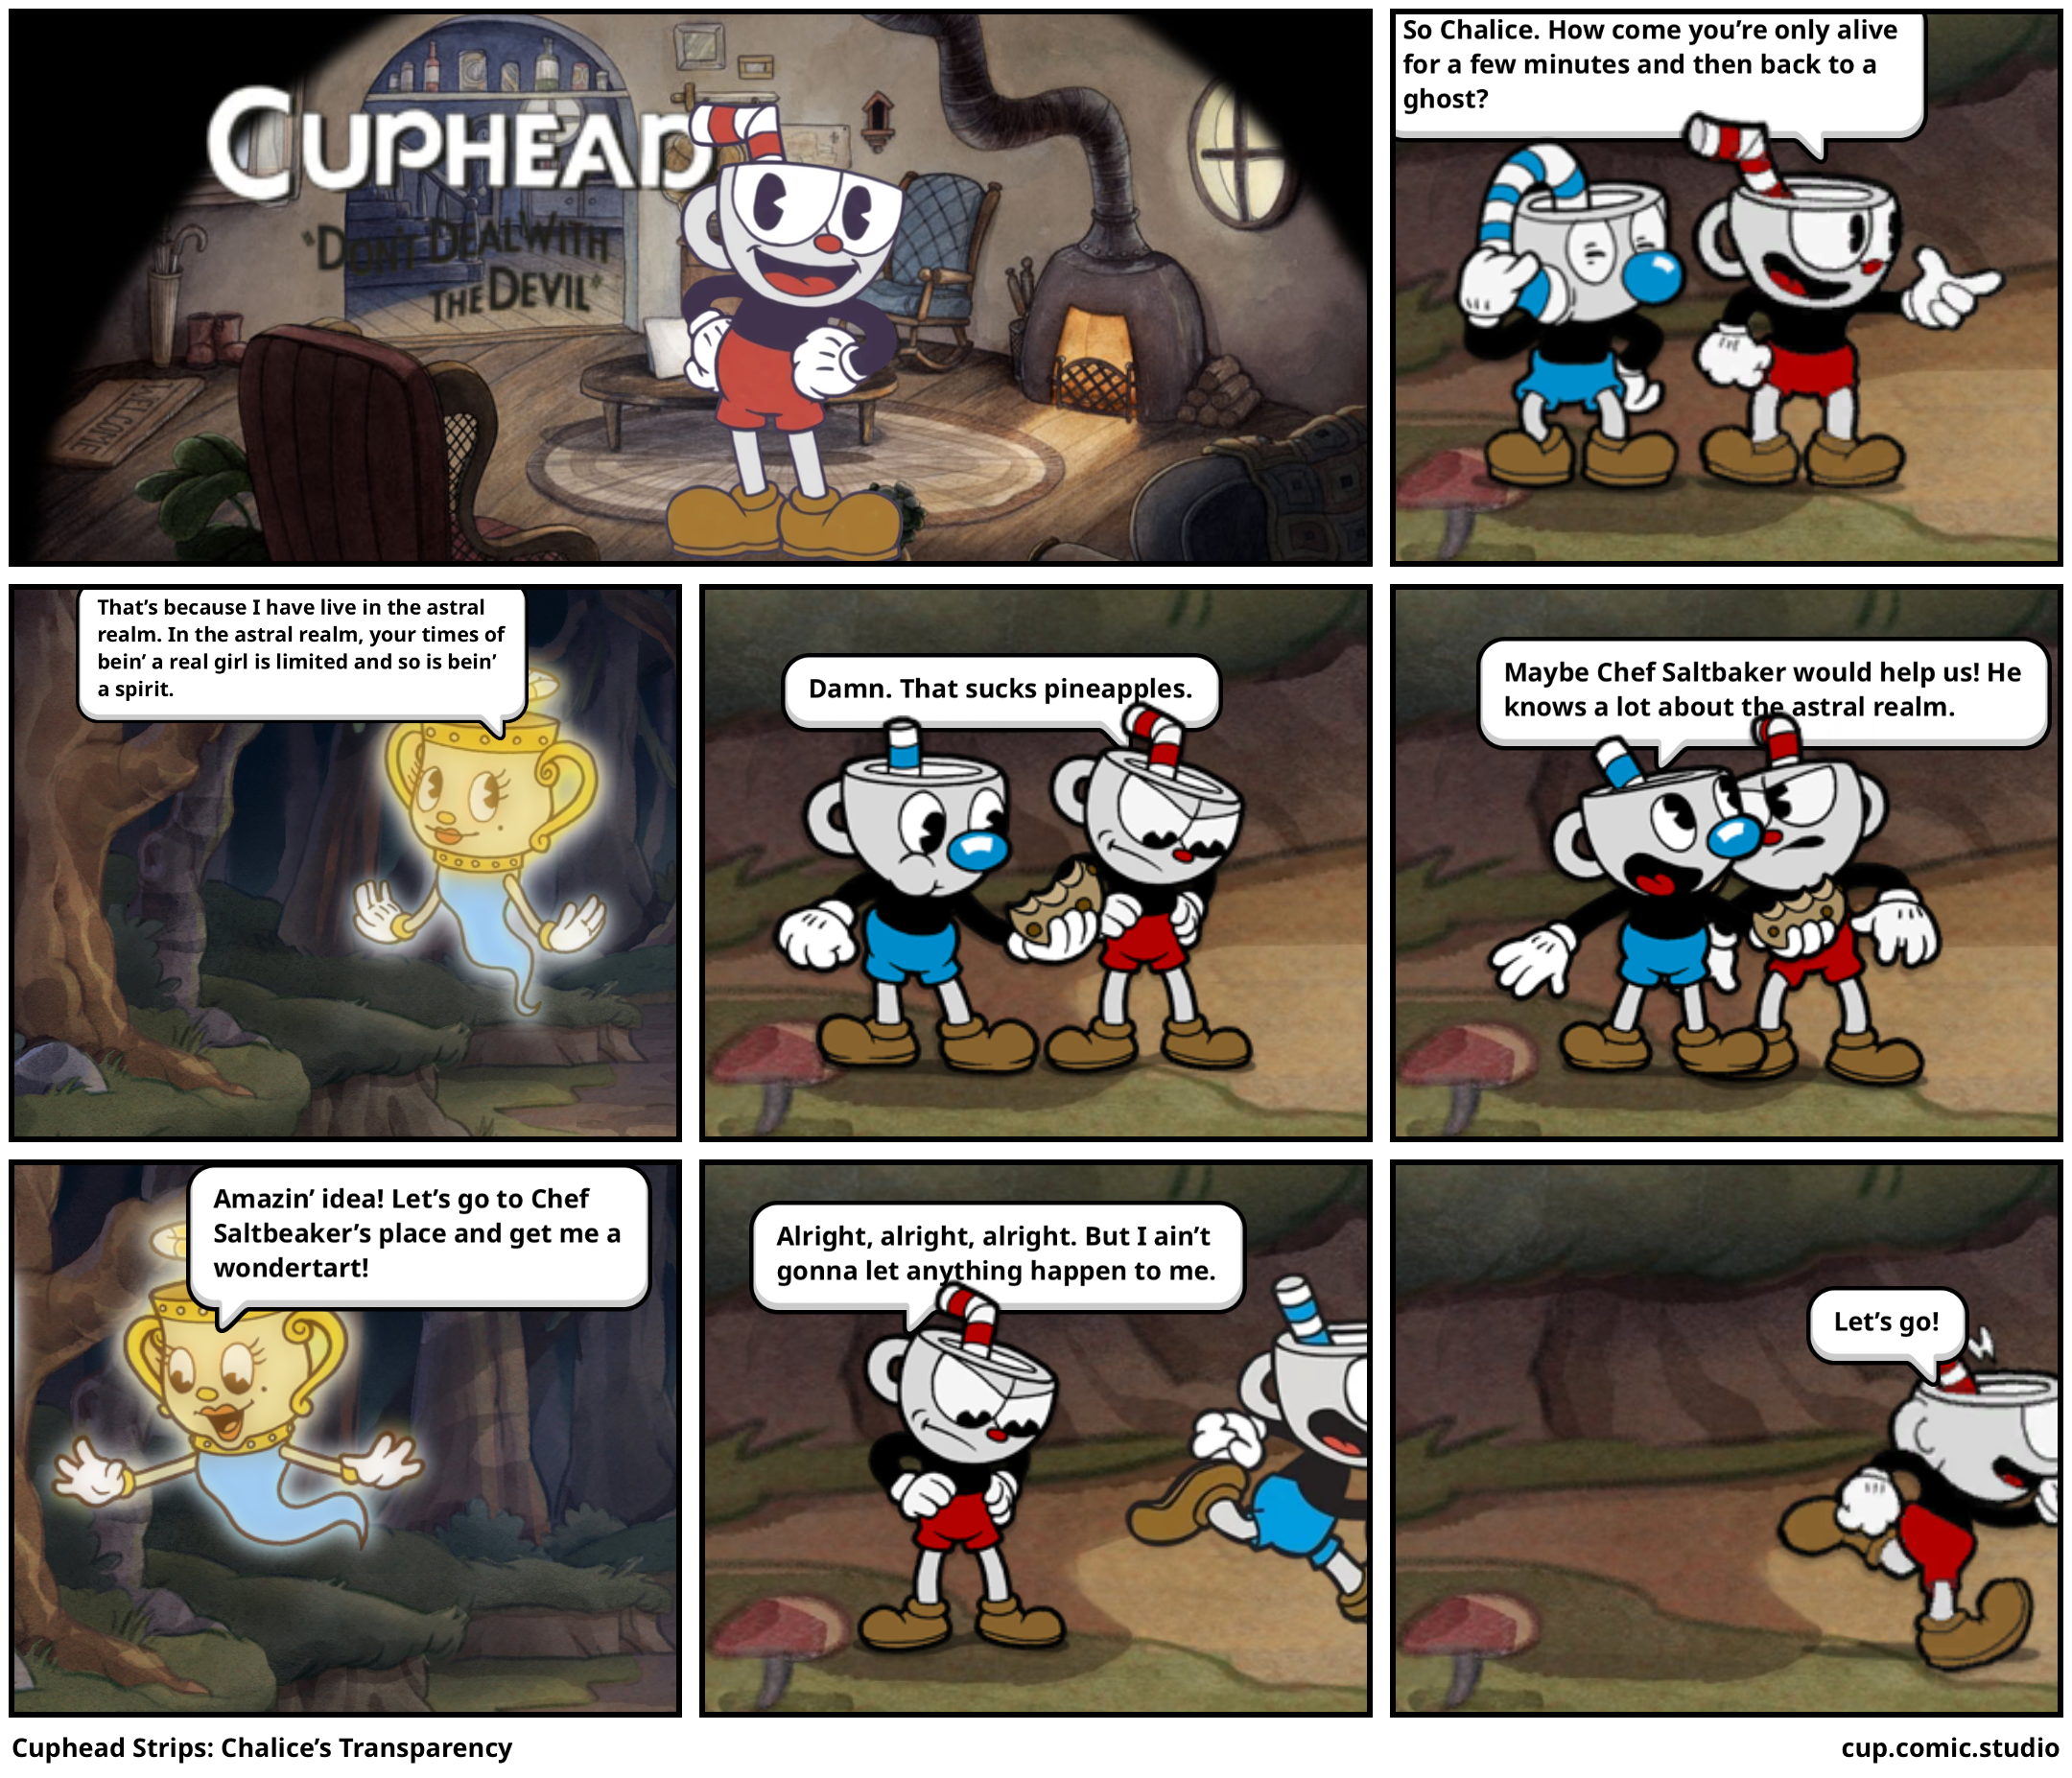 Cuphead Strips: Chalice’s Transparency